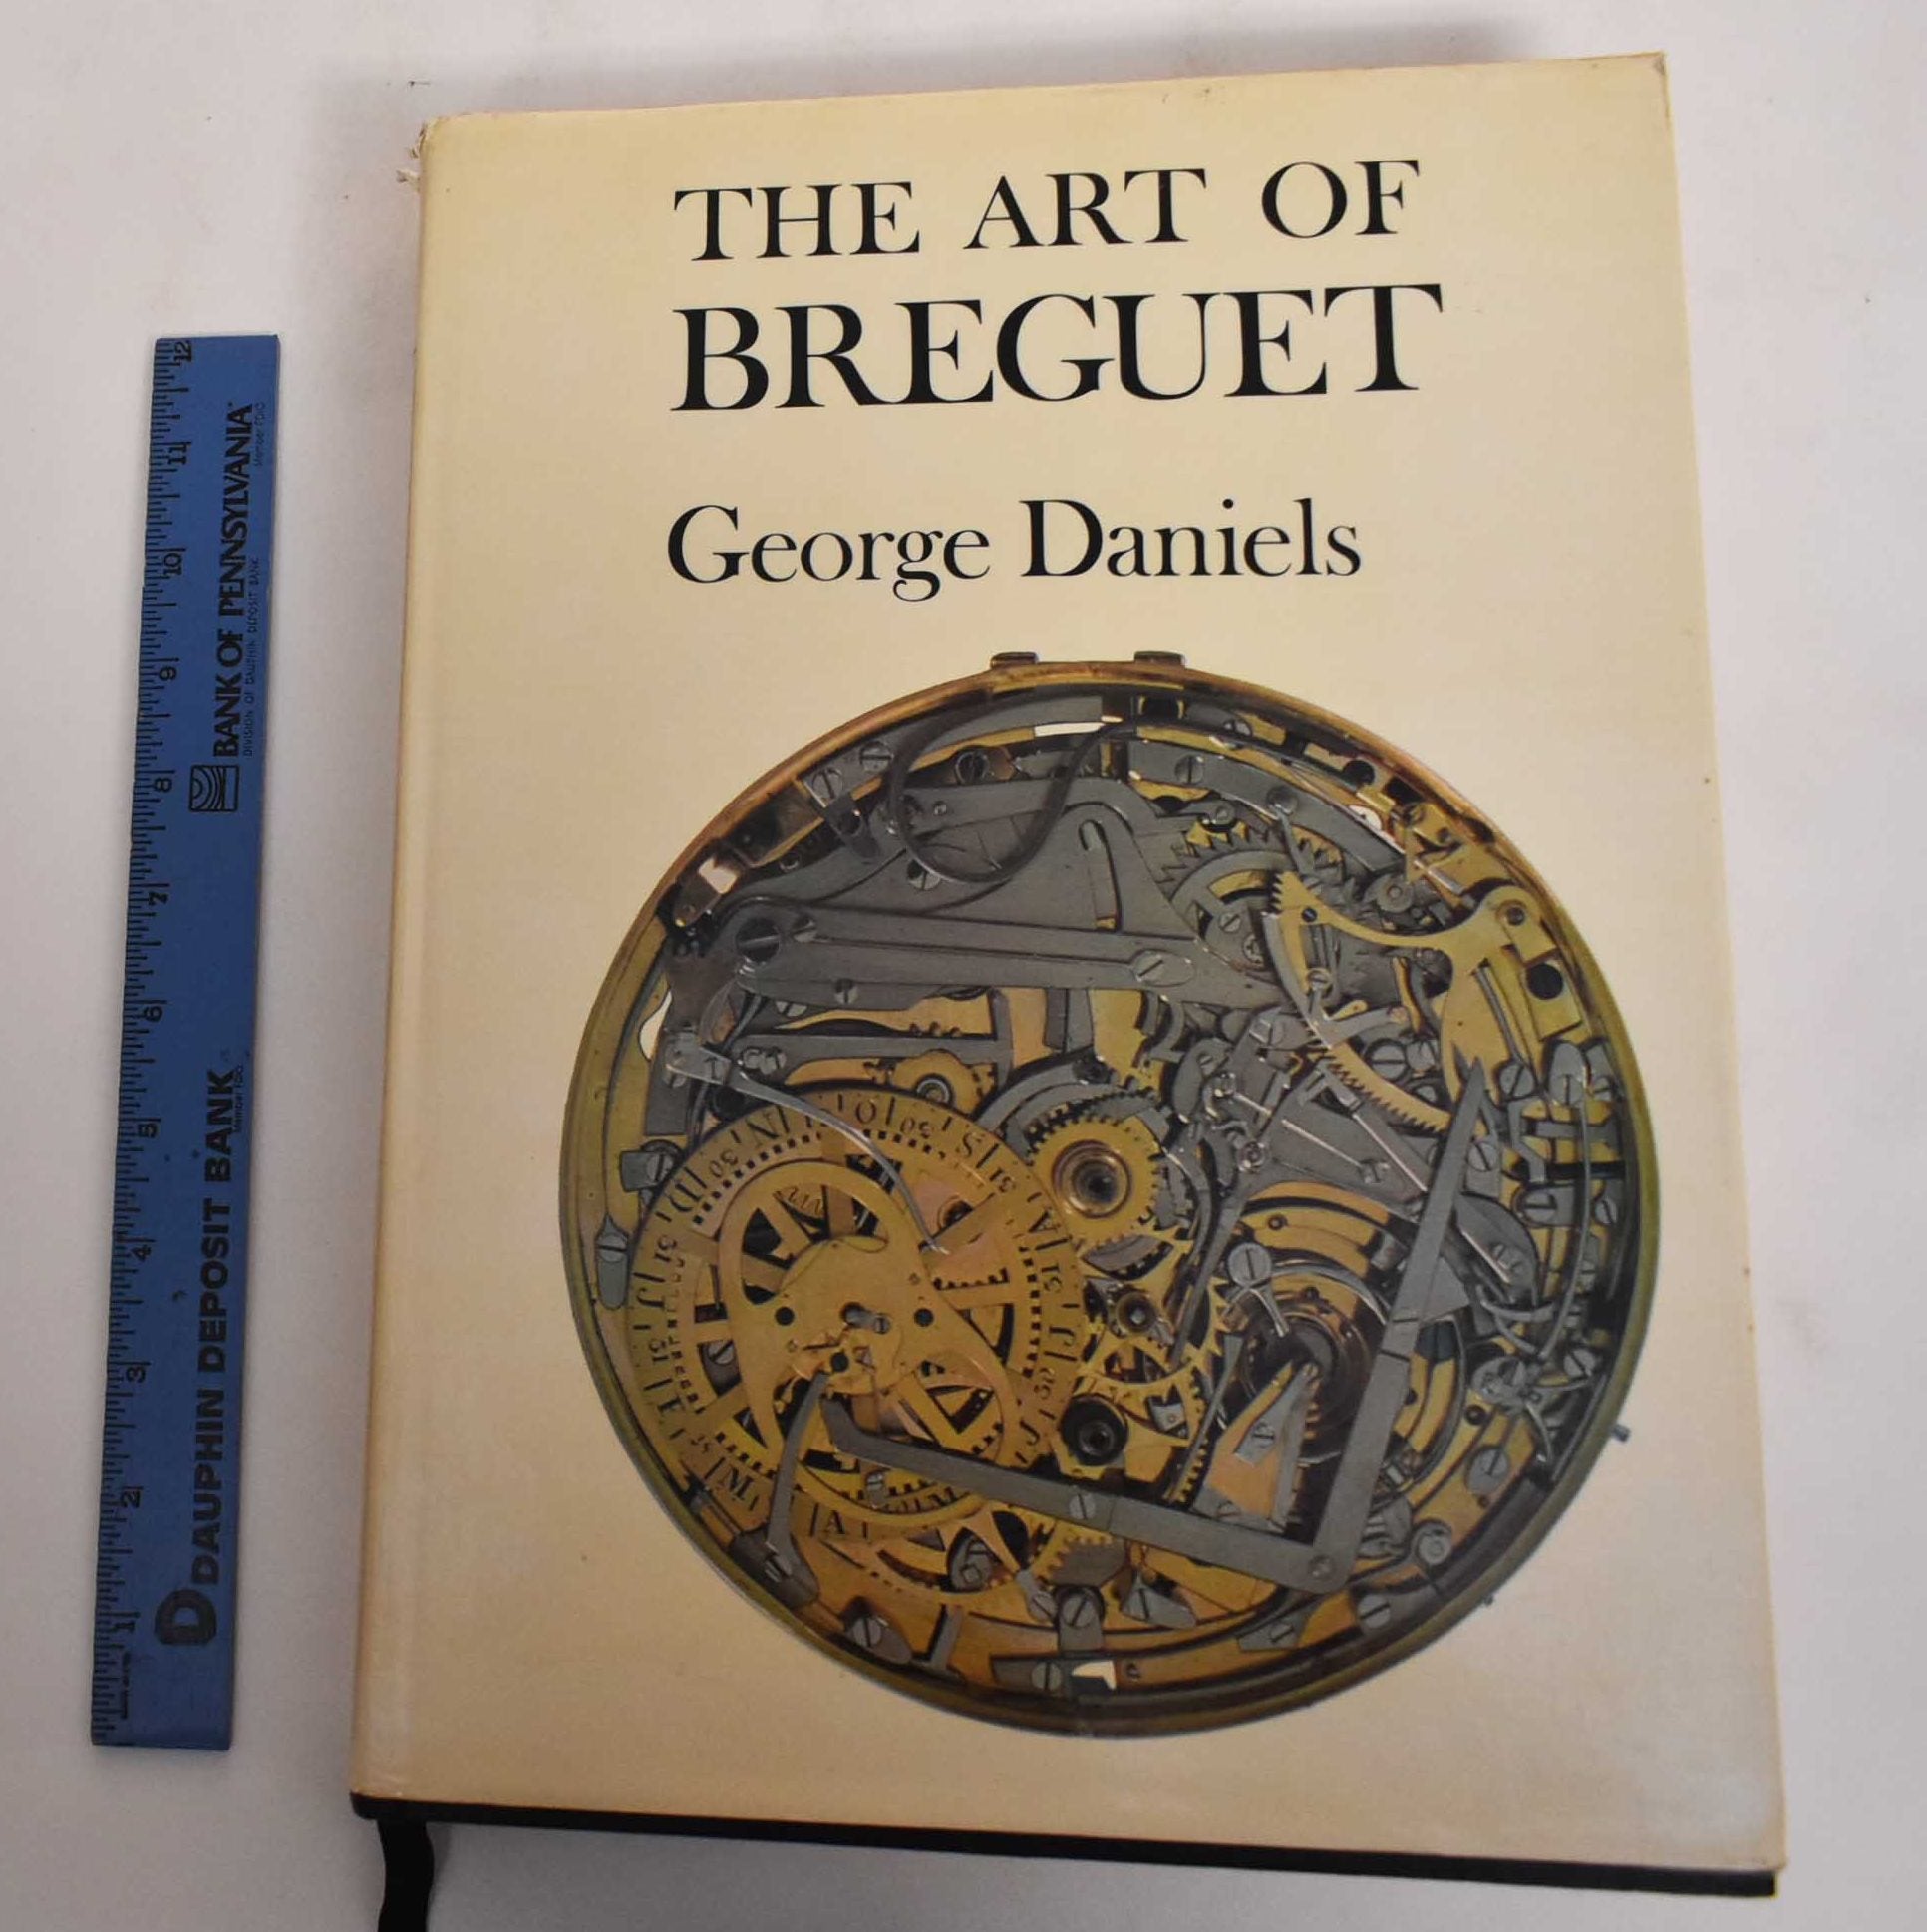 The Art of Breguet by George Daniels on Mullen Books